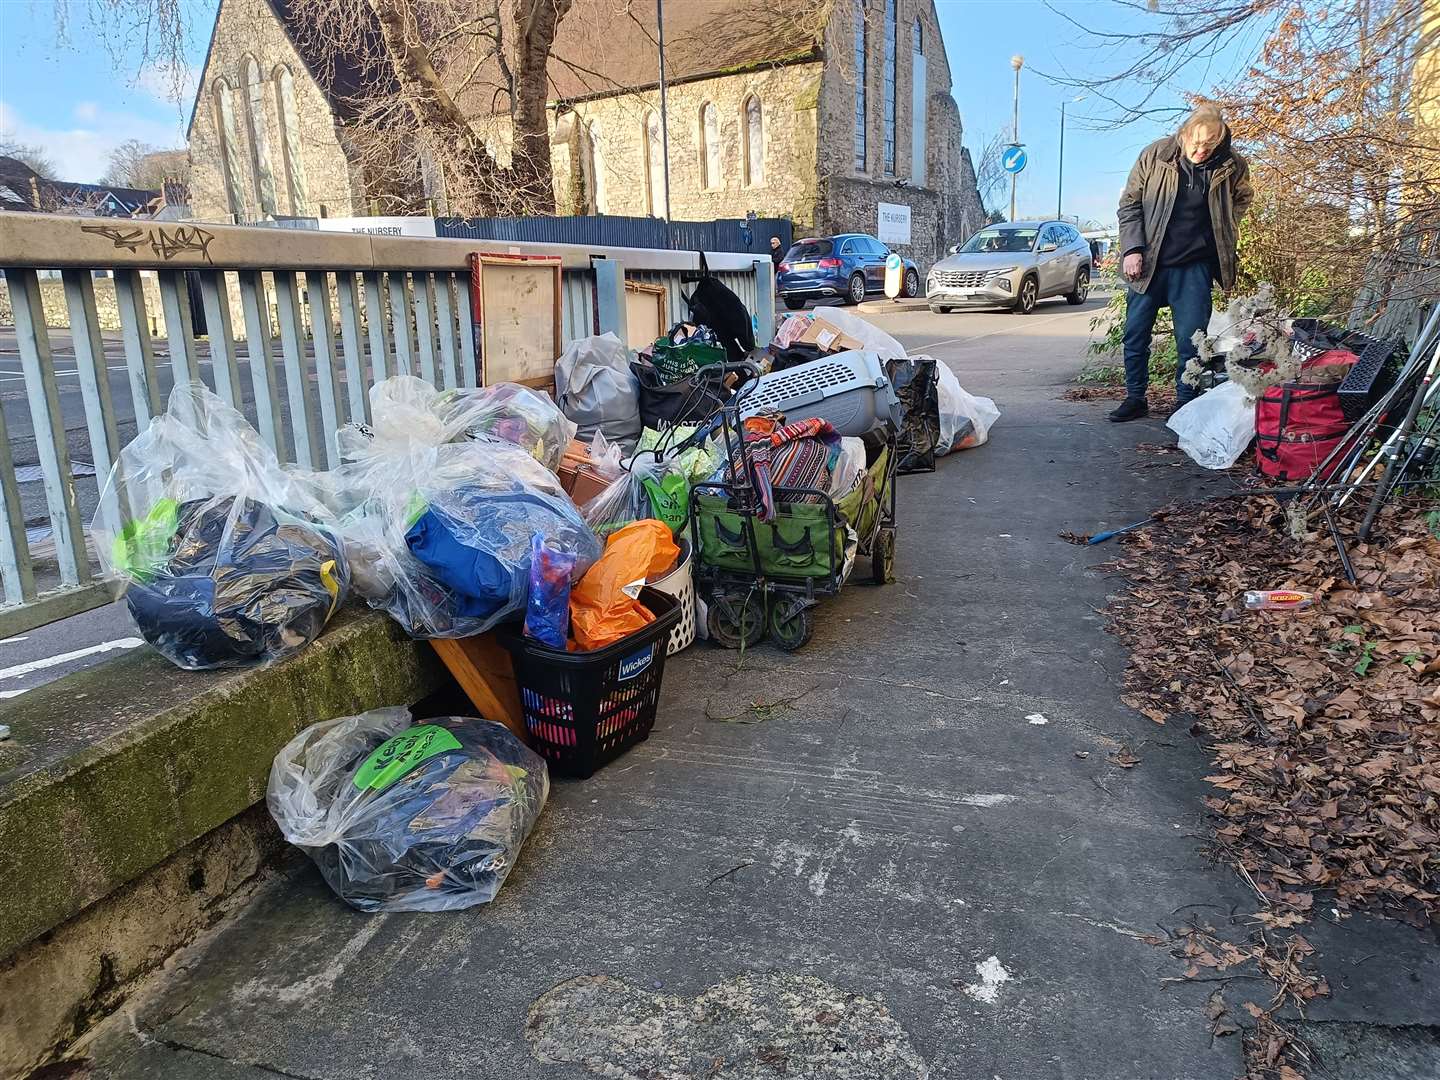 The couple have been struggling to move their belongings now they are homeless